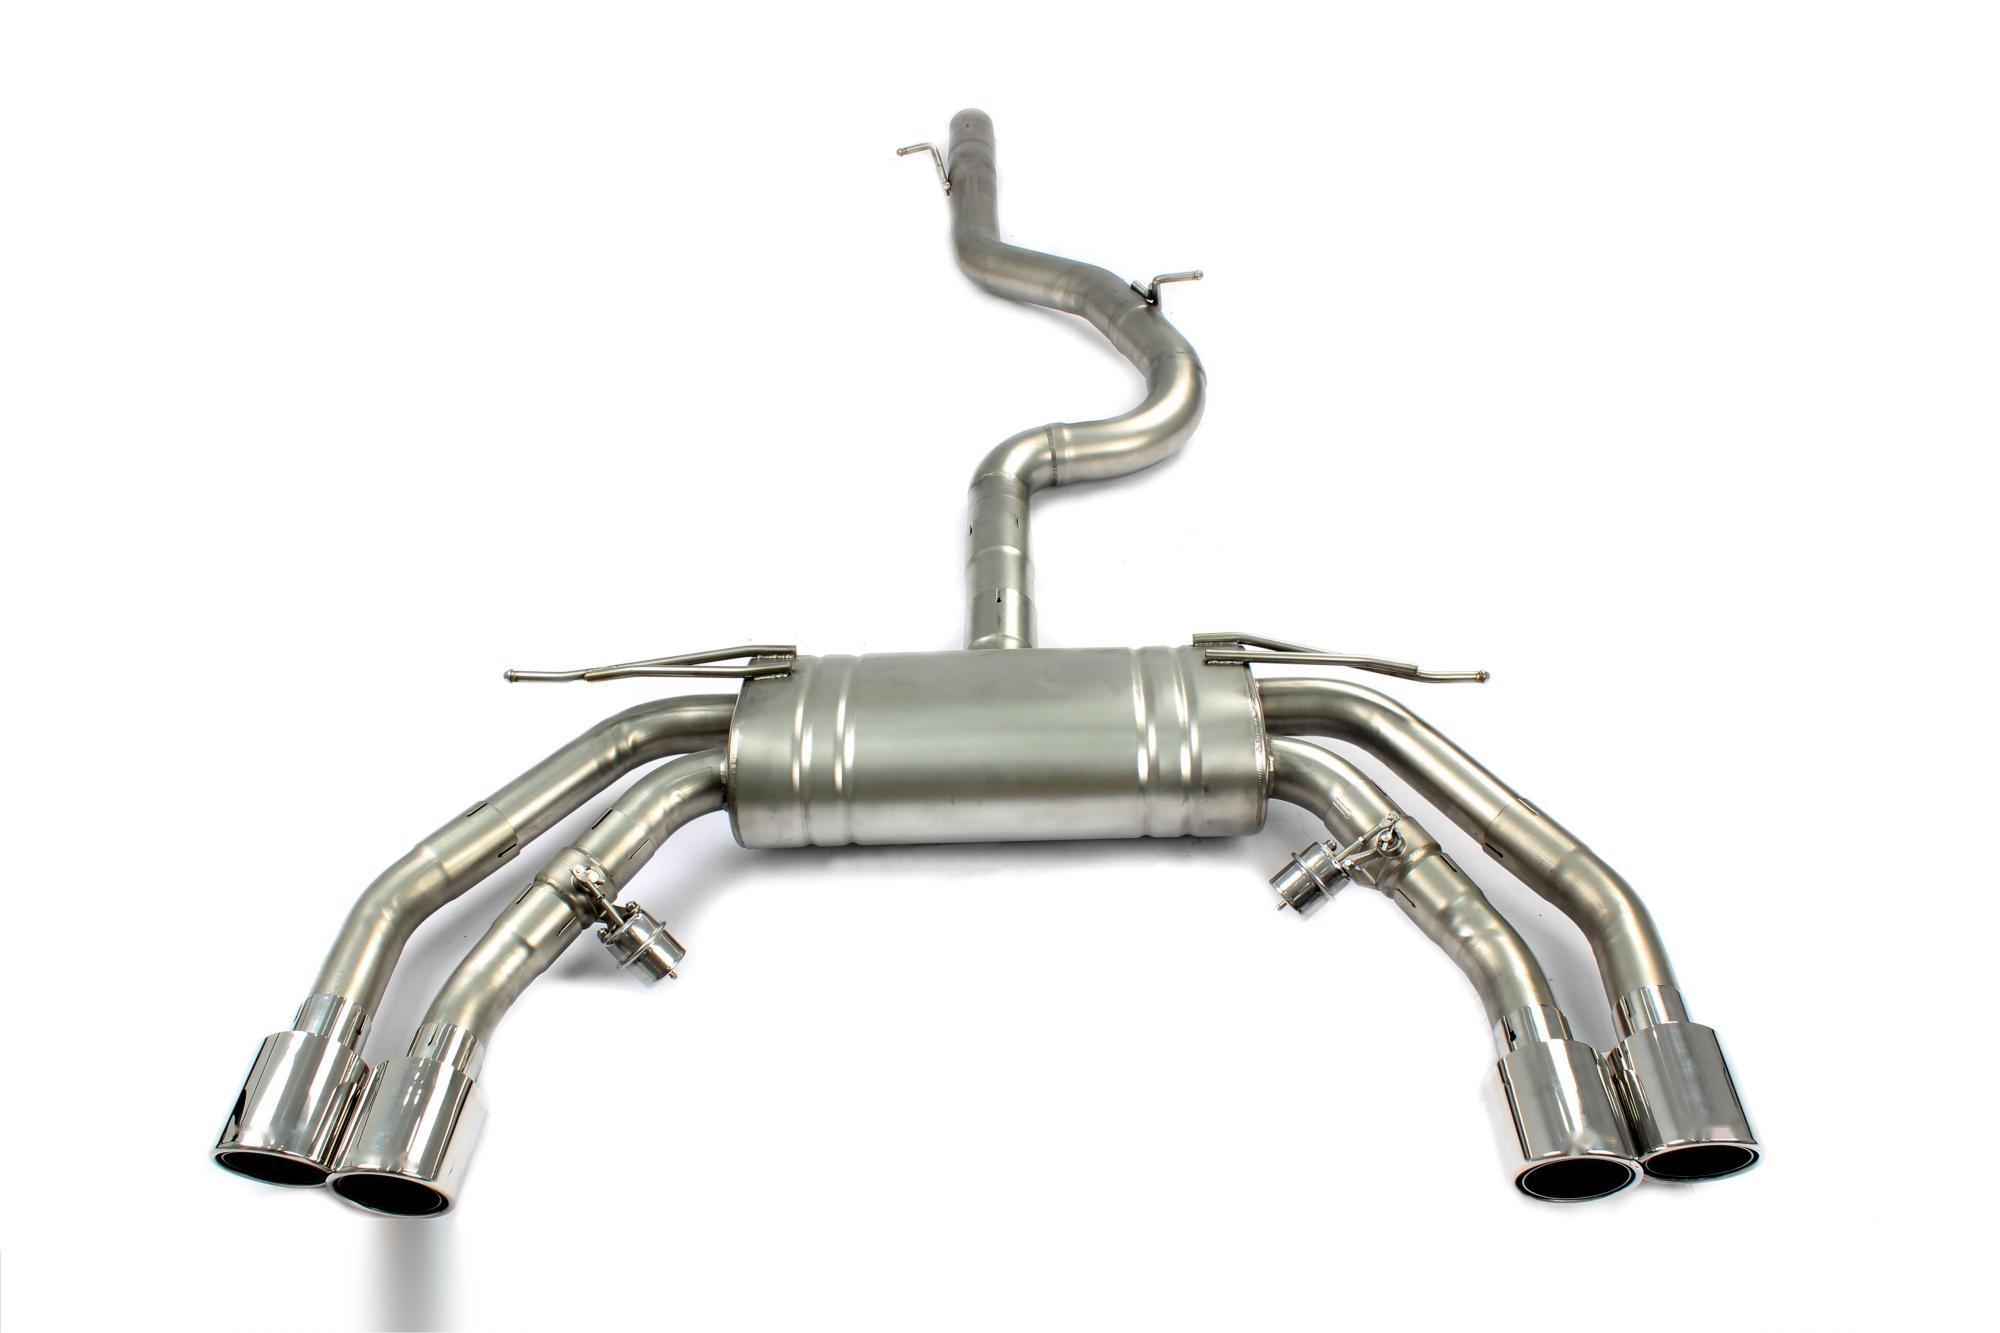 Audi S3 stainless steel exhaust catback